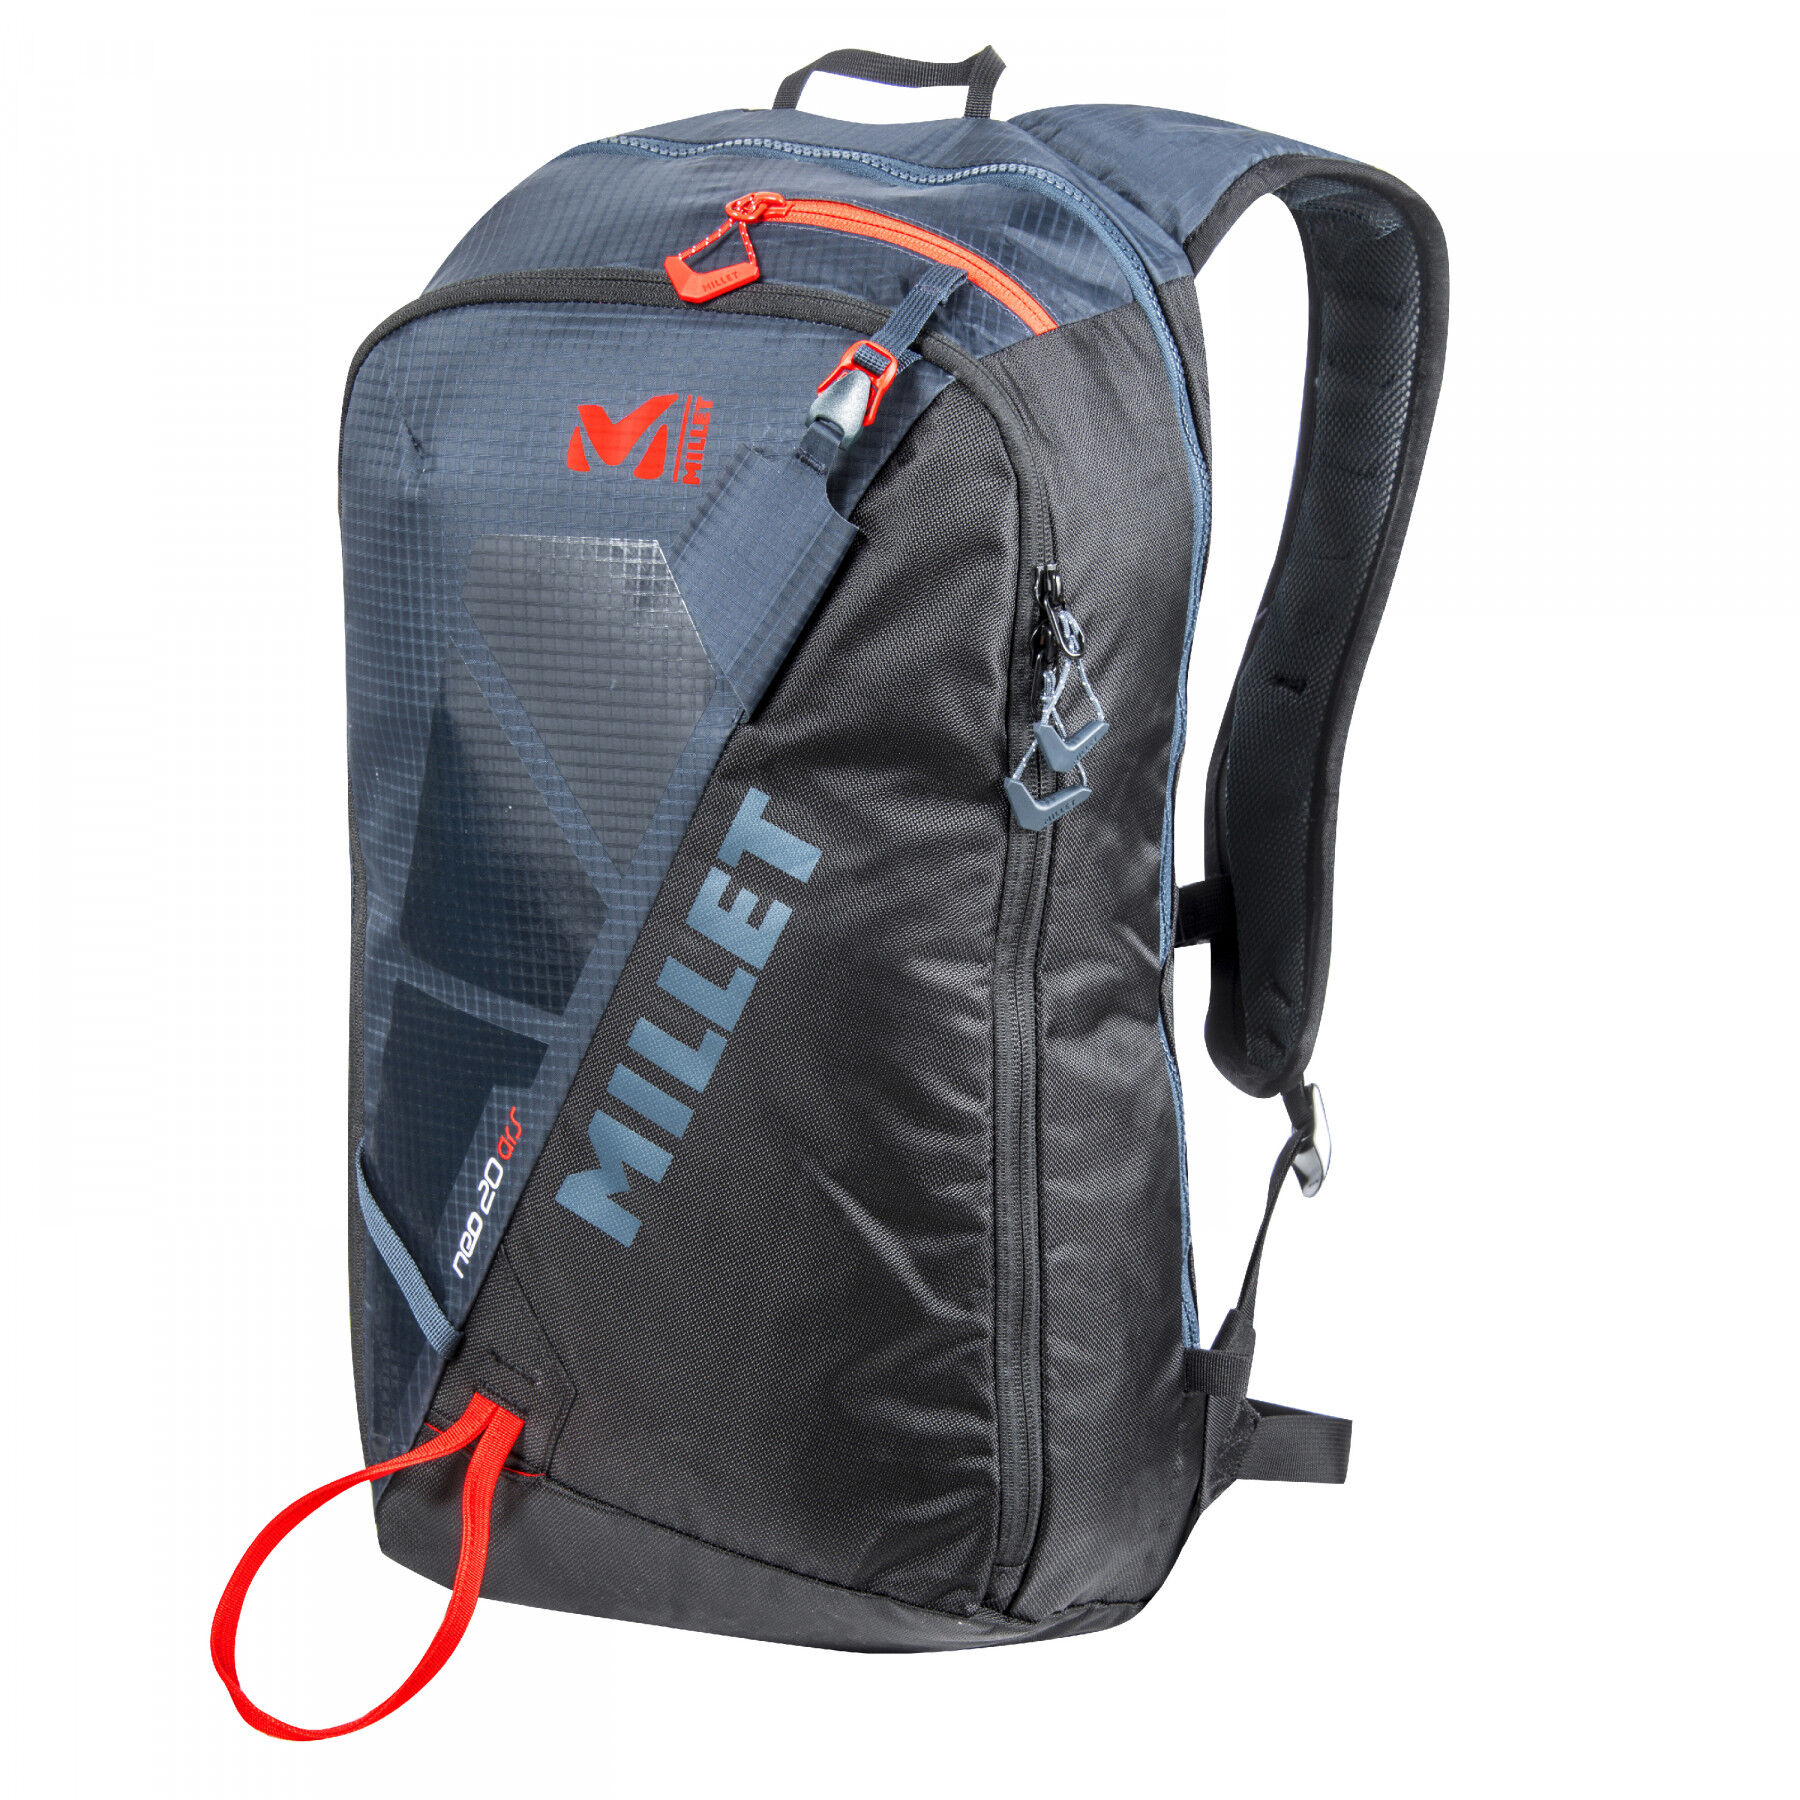 Millet Neo 20 Ars - Avalanche backpack